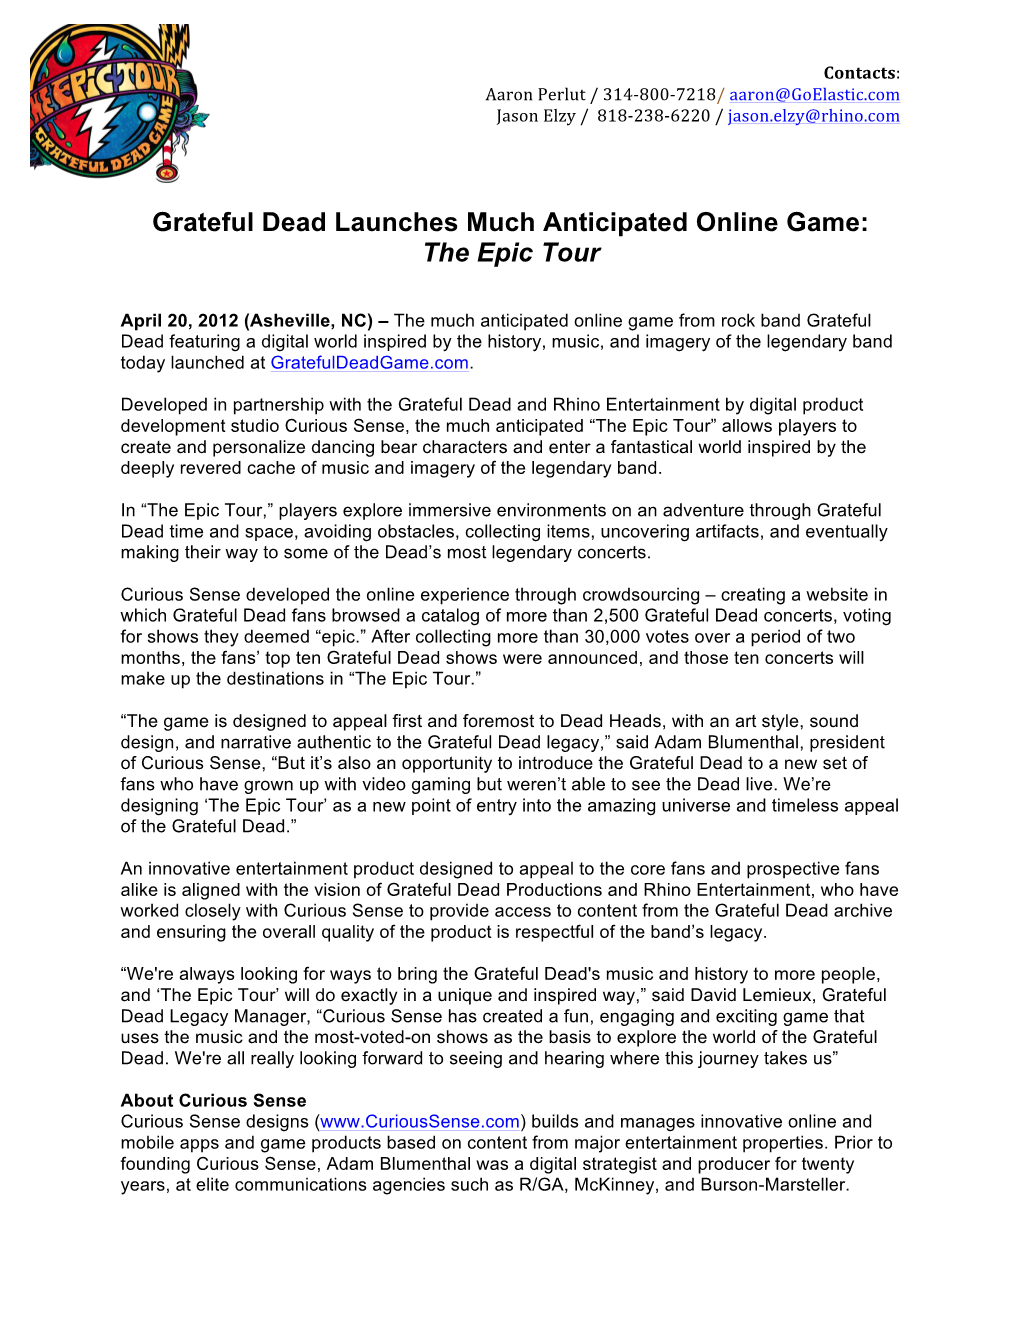 Grateful Dead Launches Much Anticipated Online Game: the Epic Tour